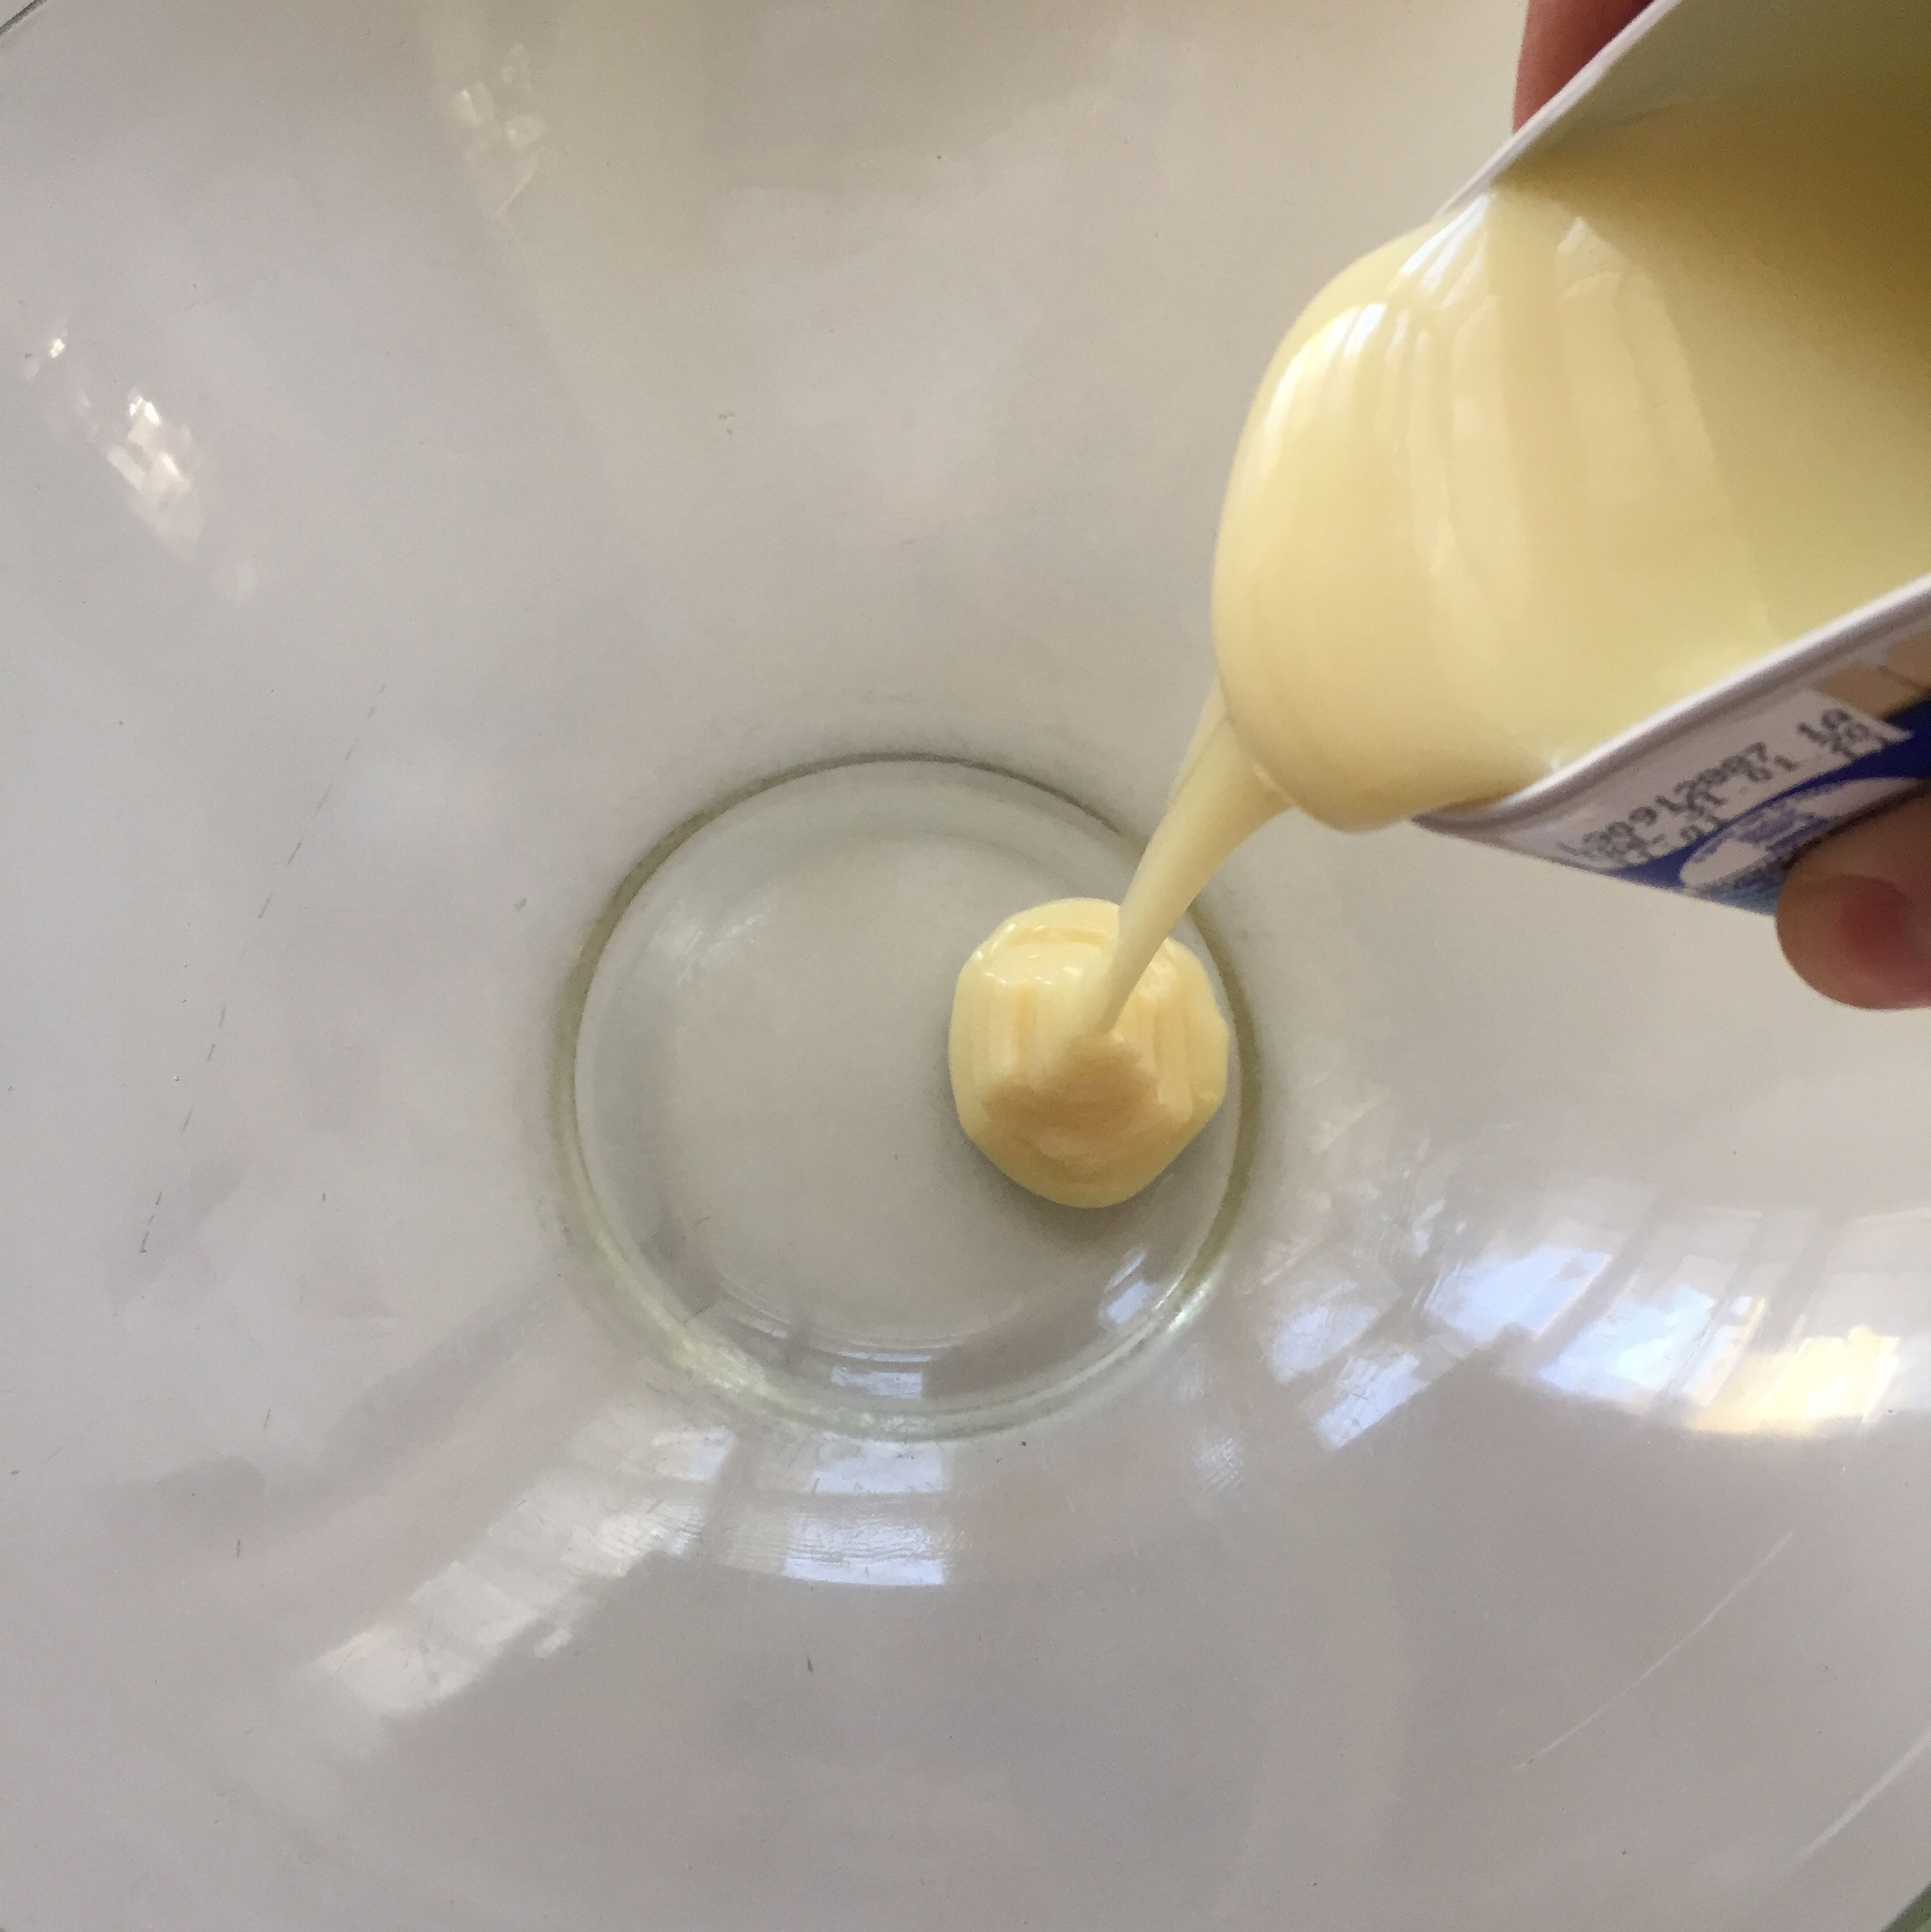 Pour the condensed milk into a bowl.